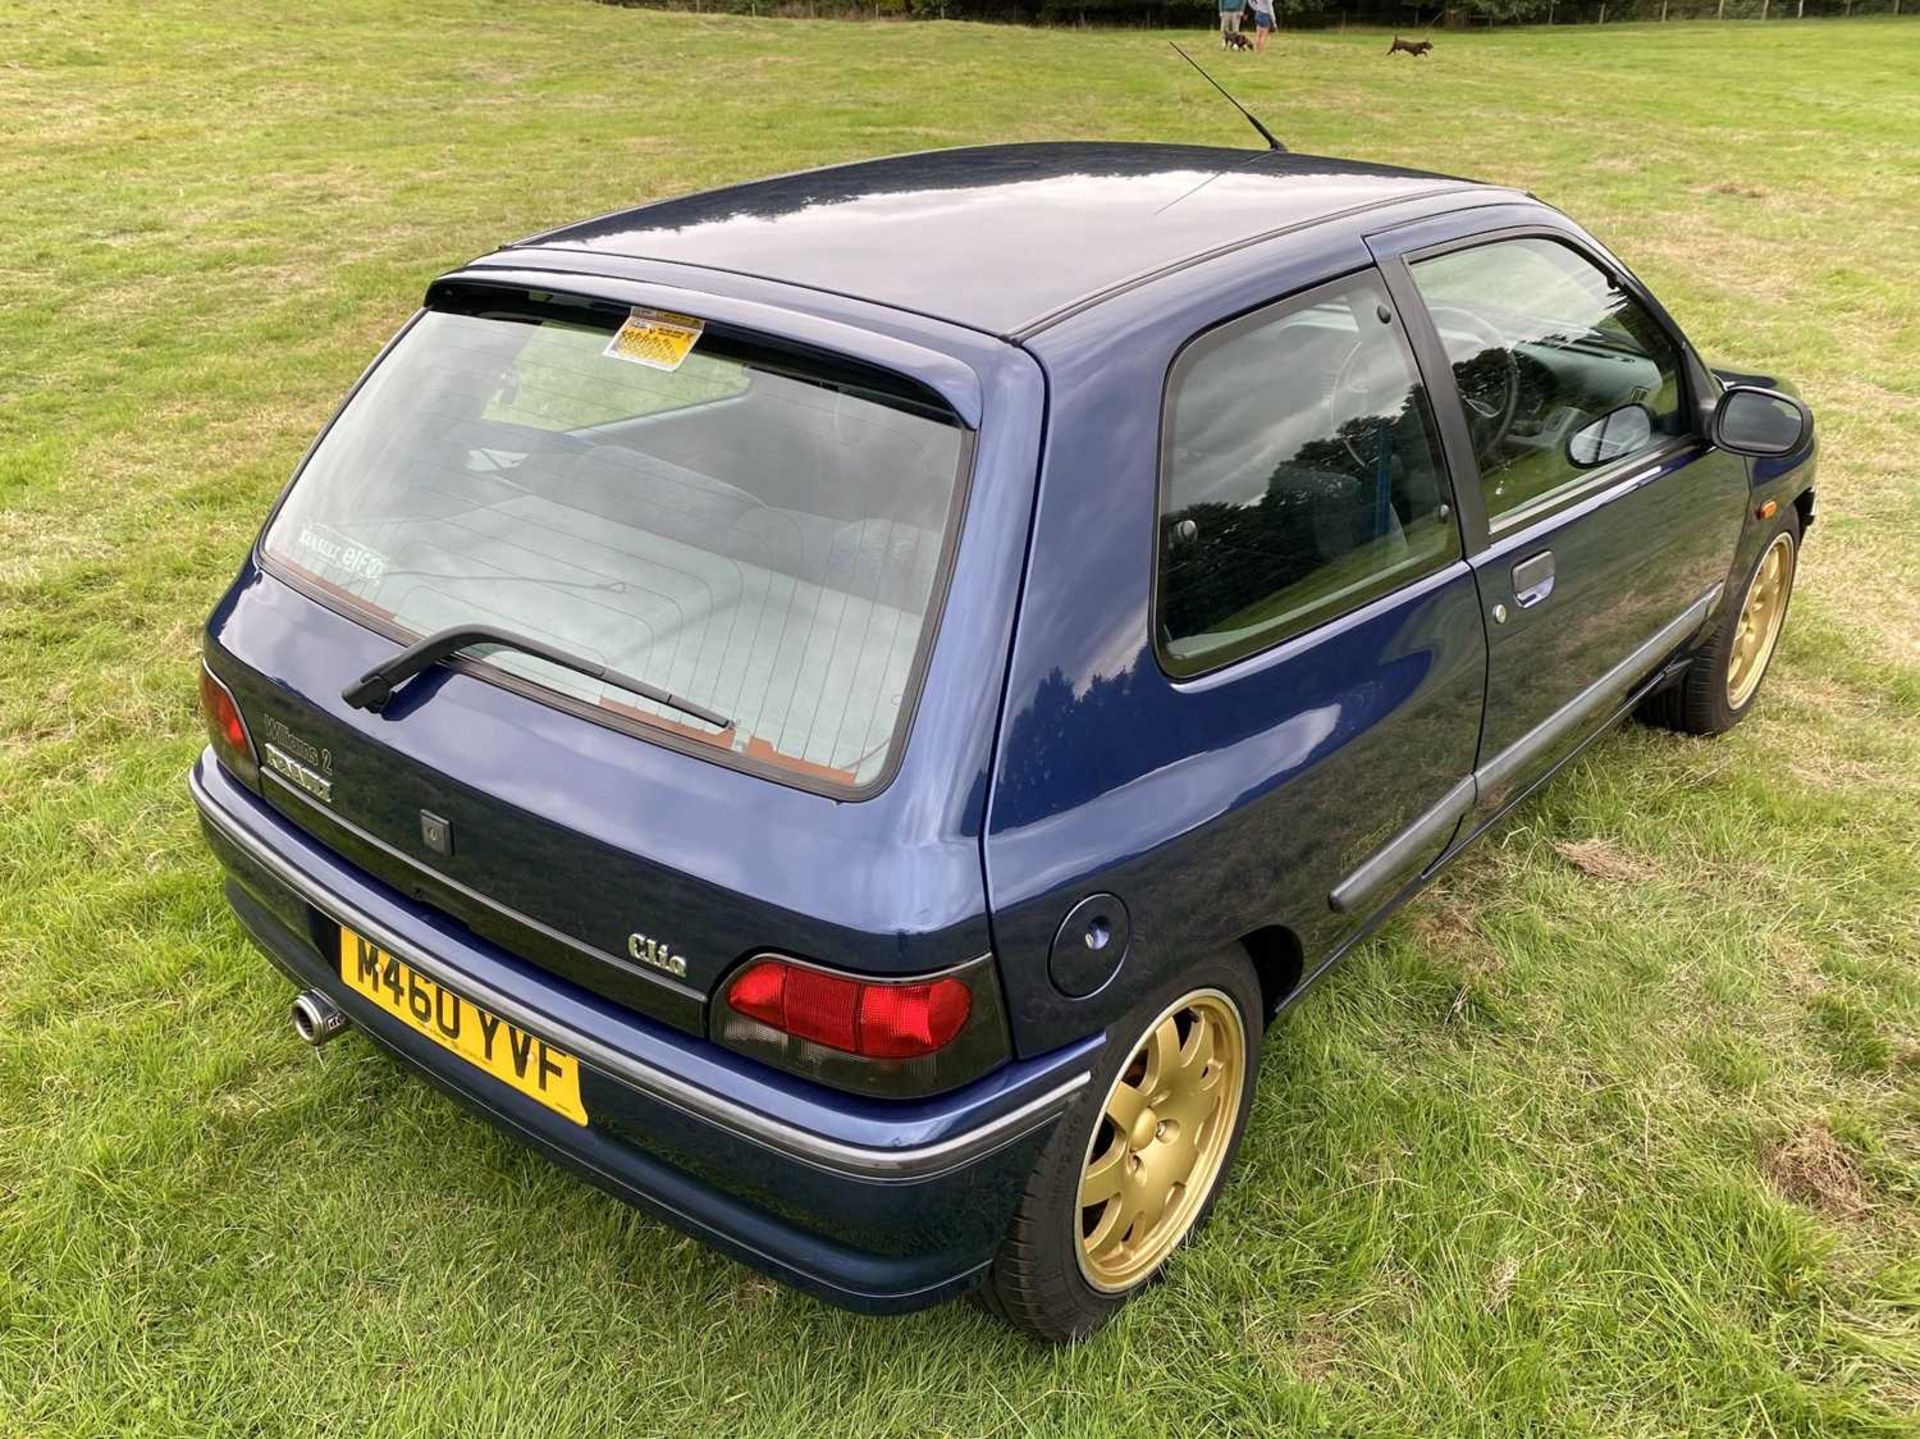 1995 Renault Clio Williams 2 UK-delivered, second series model and said to be one of just 482 produc - Image 15 of 66